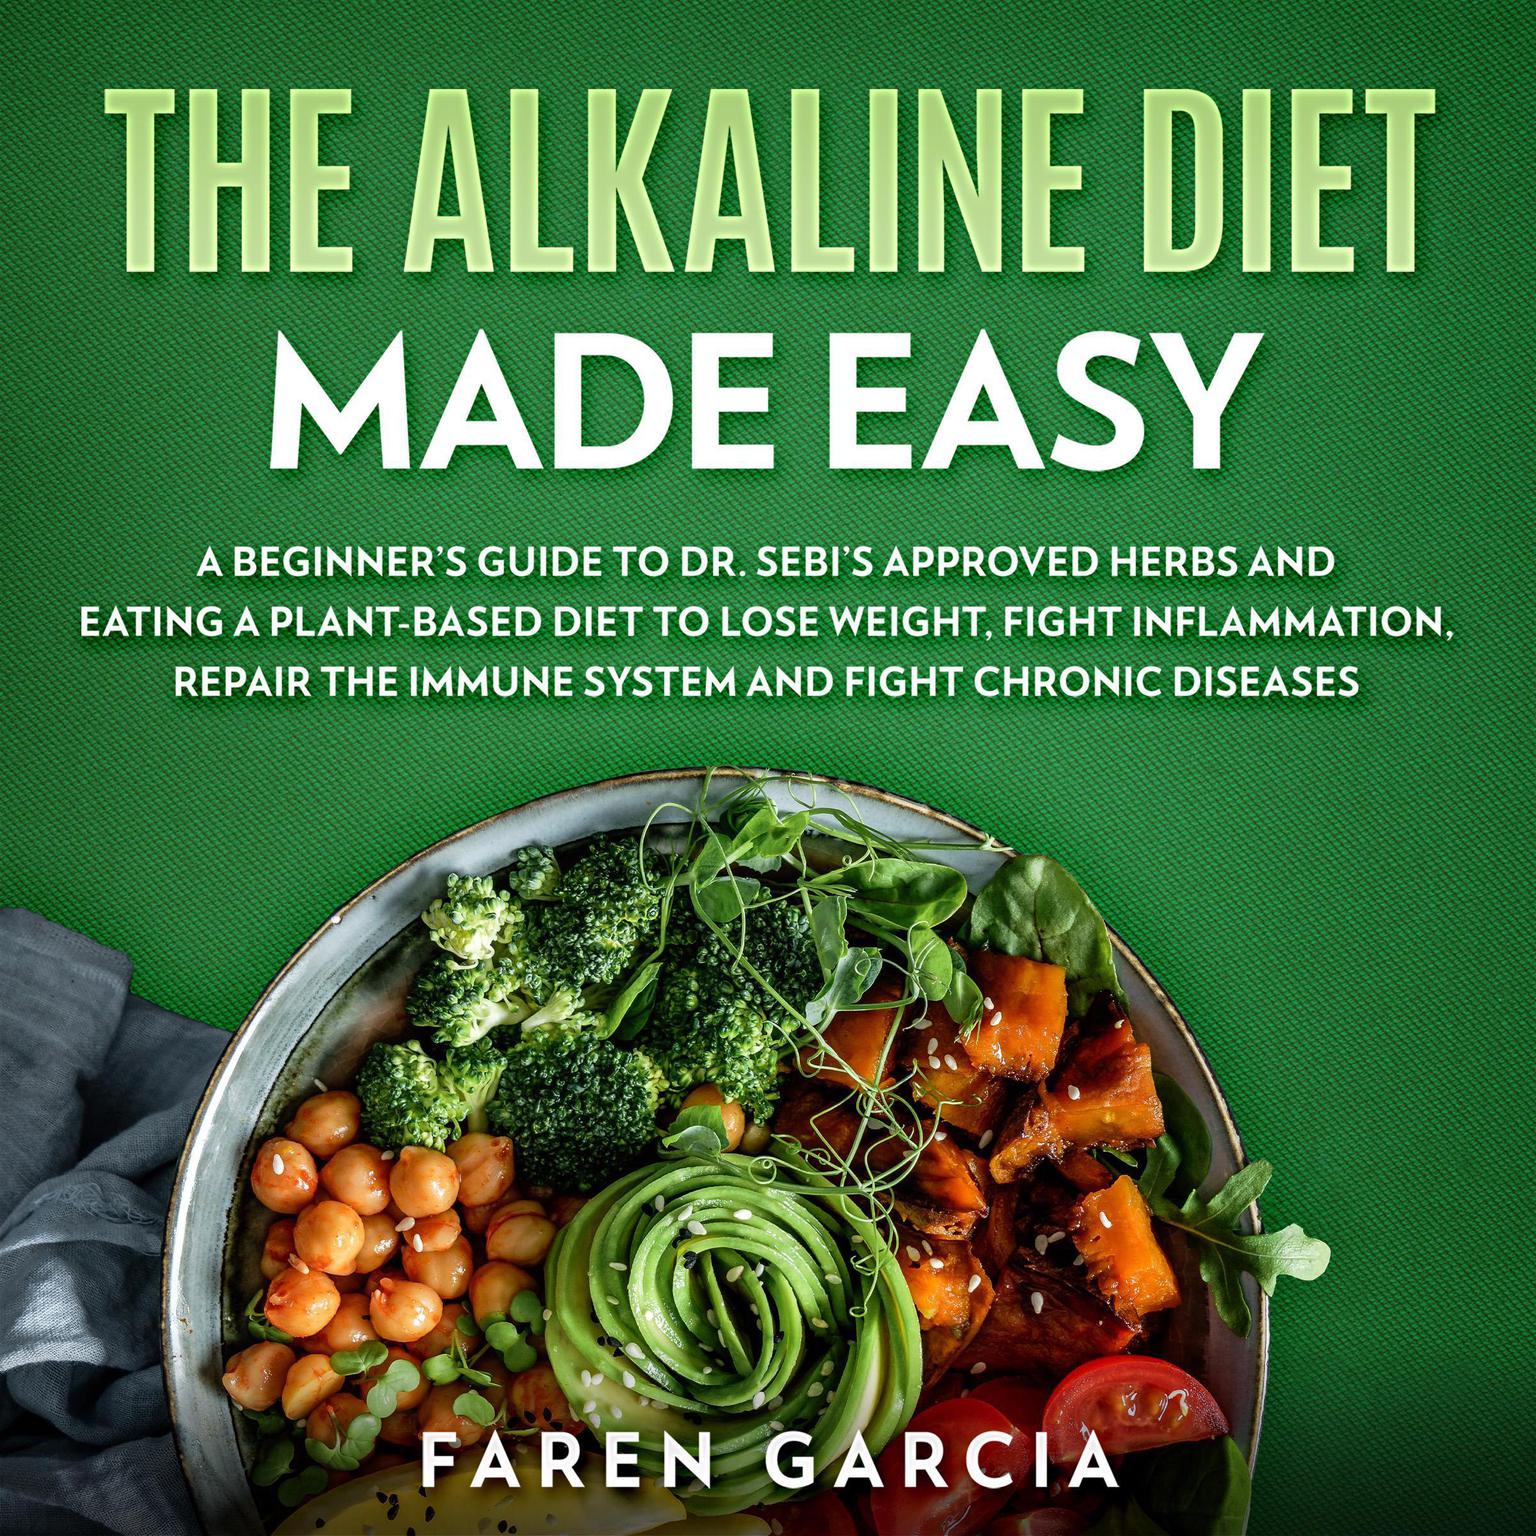 The Alkaline Diet Made Easy: A Beginners Guide to Dr. Sebis Approved Herbs and Eating a Plant-Based Diet to Lose Weight, Fight Inflammation, Repair the Immune System and Fight Chronic Diseases Audiobook, by Faren Garcia